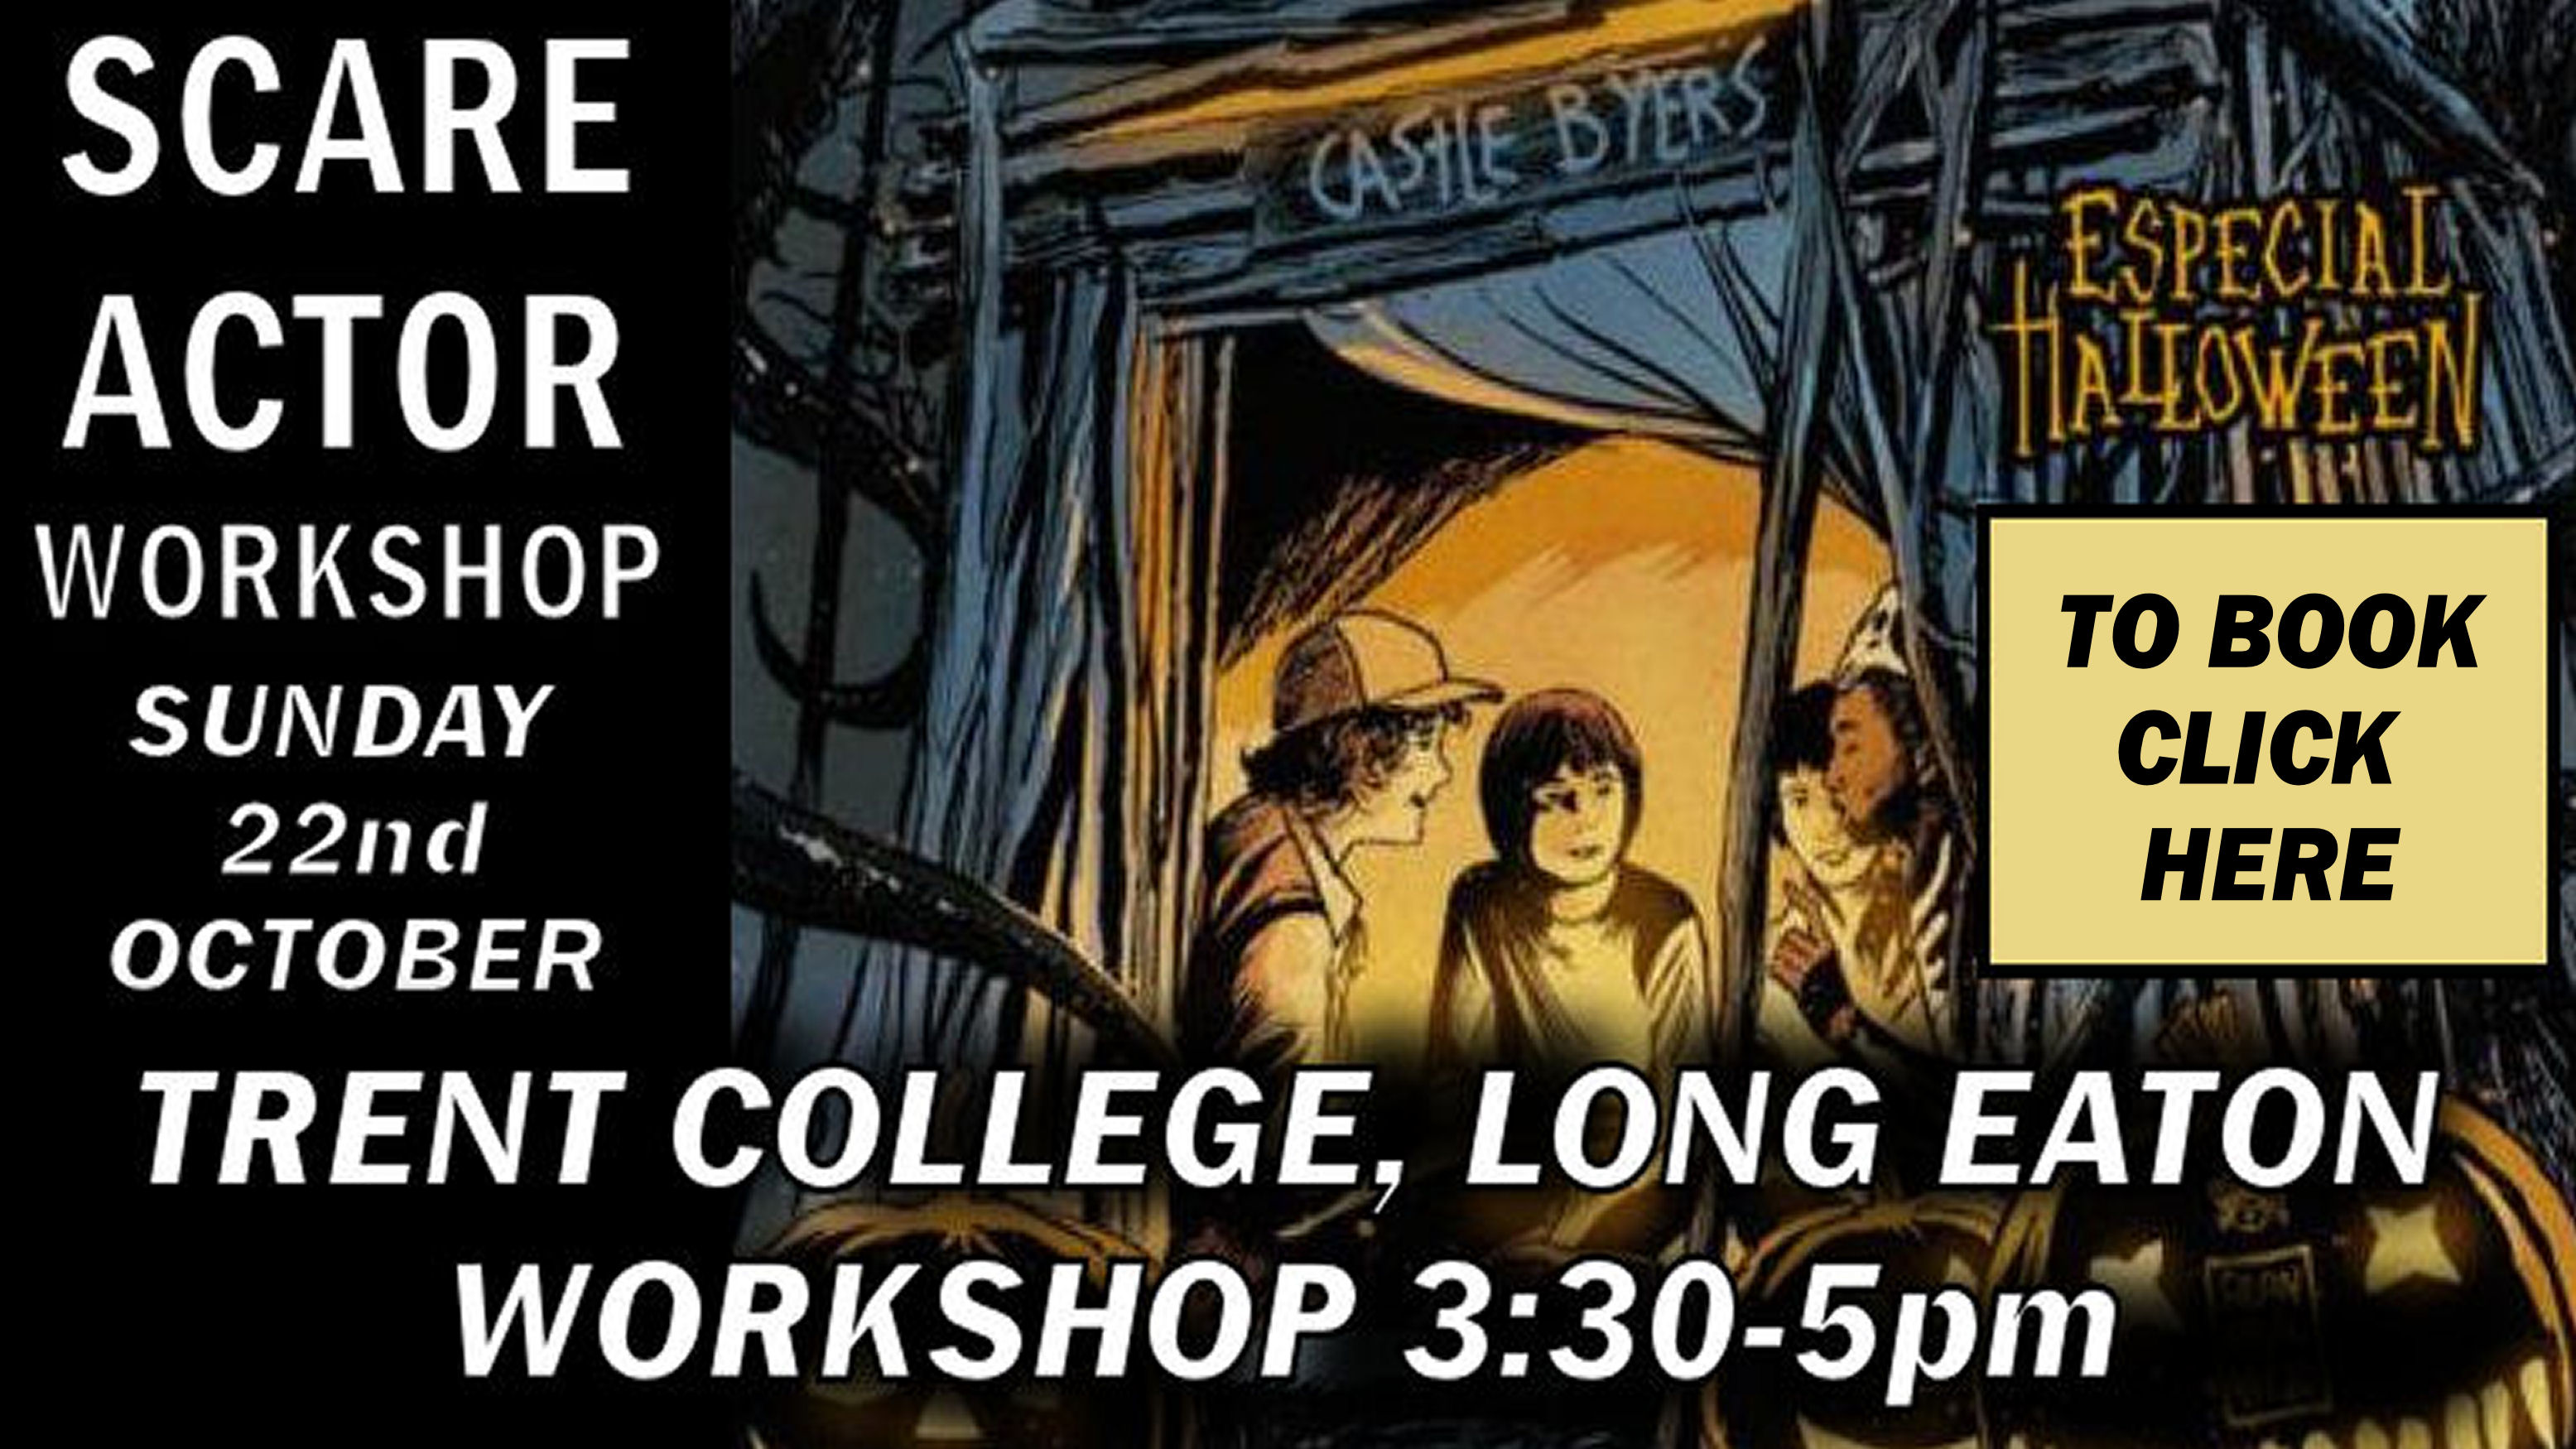 An image advertising our upcoming Halloween Scare Actor workshop